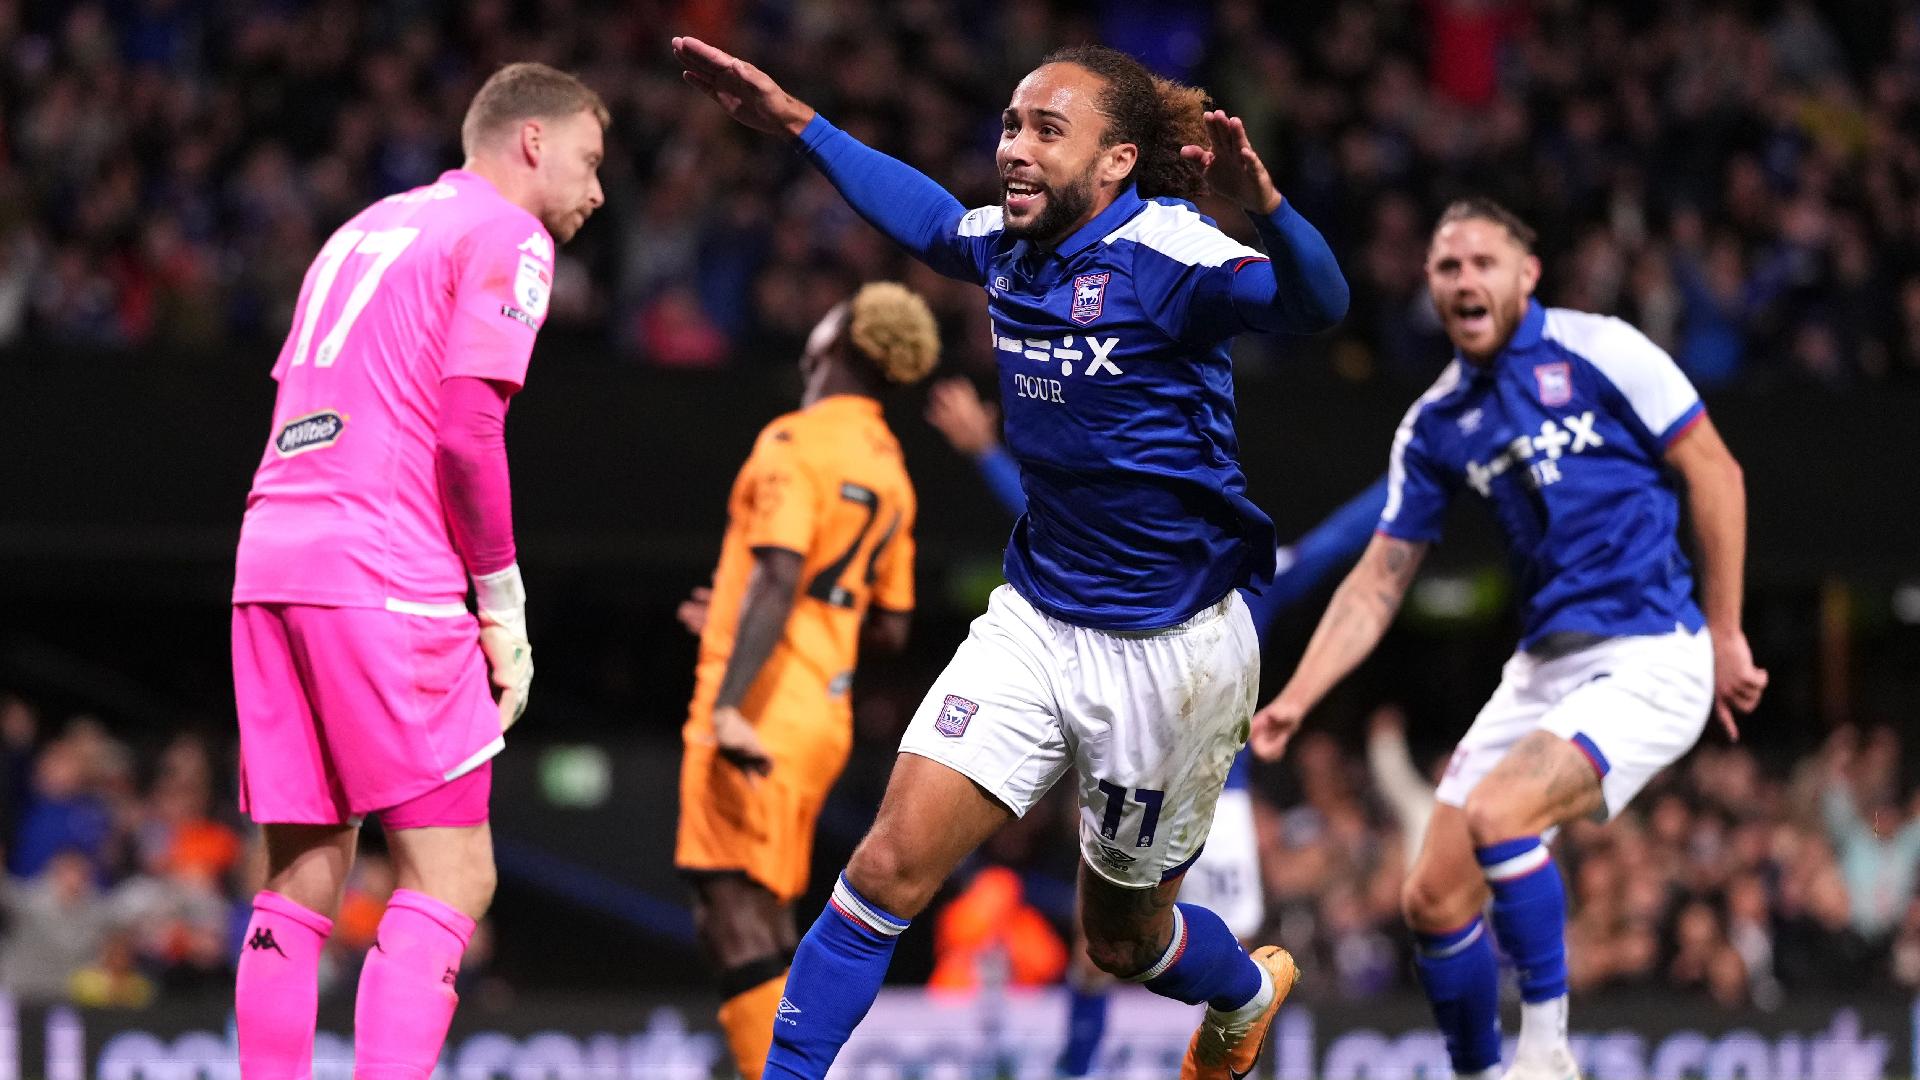 Ipswich move top of Championship with win over Hull